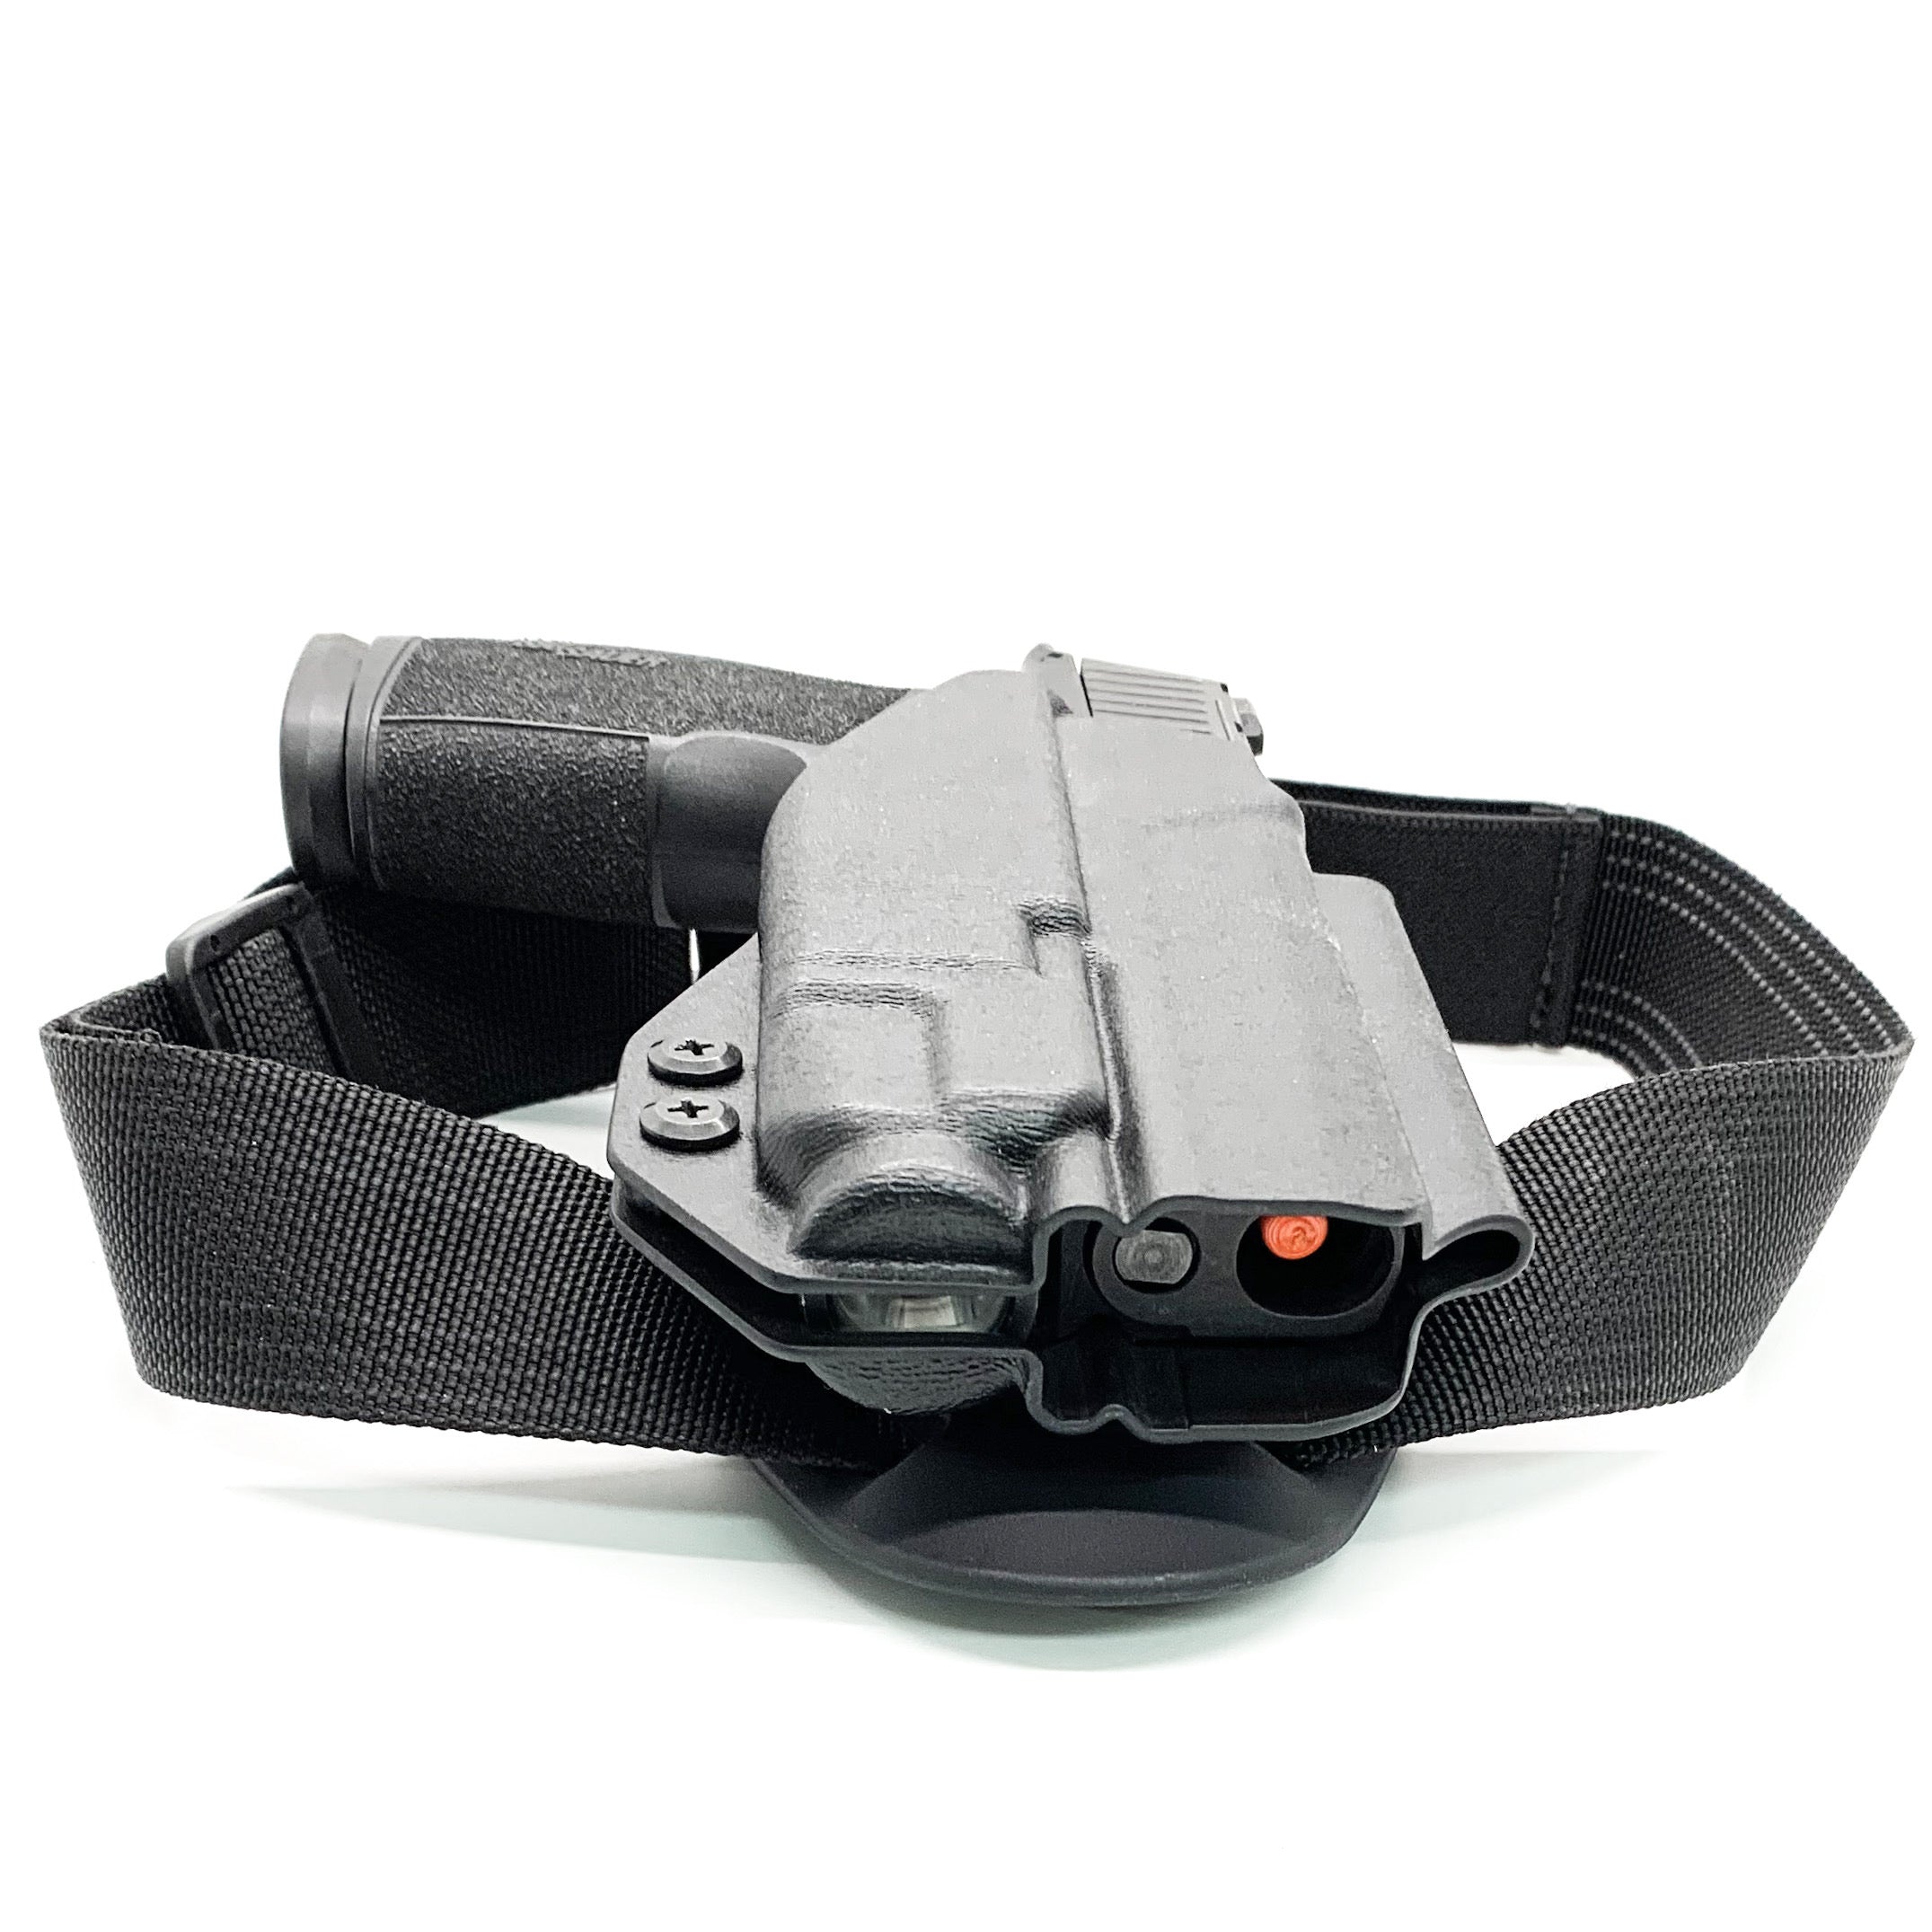 For the best Outside Waistband Duty & Competition Kydex Holster designed for the Sig Sauer P365-XMACRO with Streamlight TLR-7 or TLR7A , shop Four Brothers Holsters.  Full sweat guard, adjustable retention, minimal material & smooth edges to reduce printing, open muzzle, cleared for red dot sights. Made in the USA. 